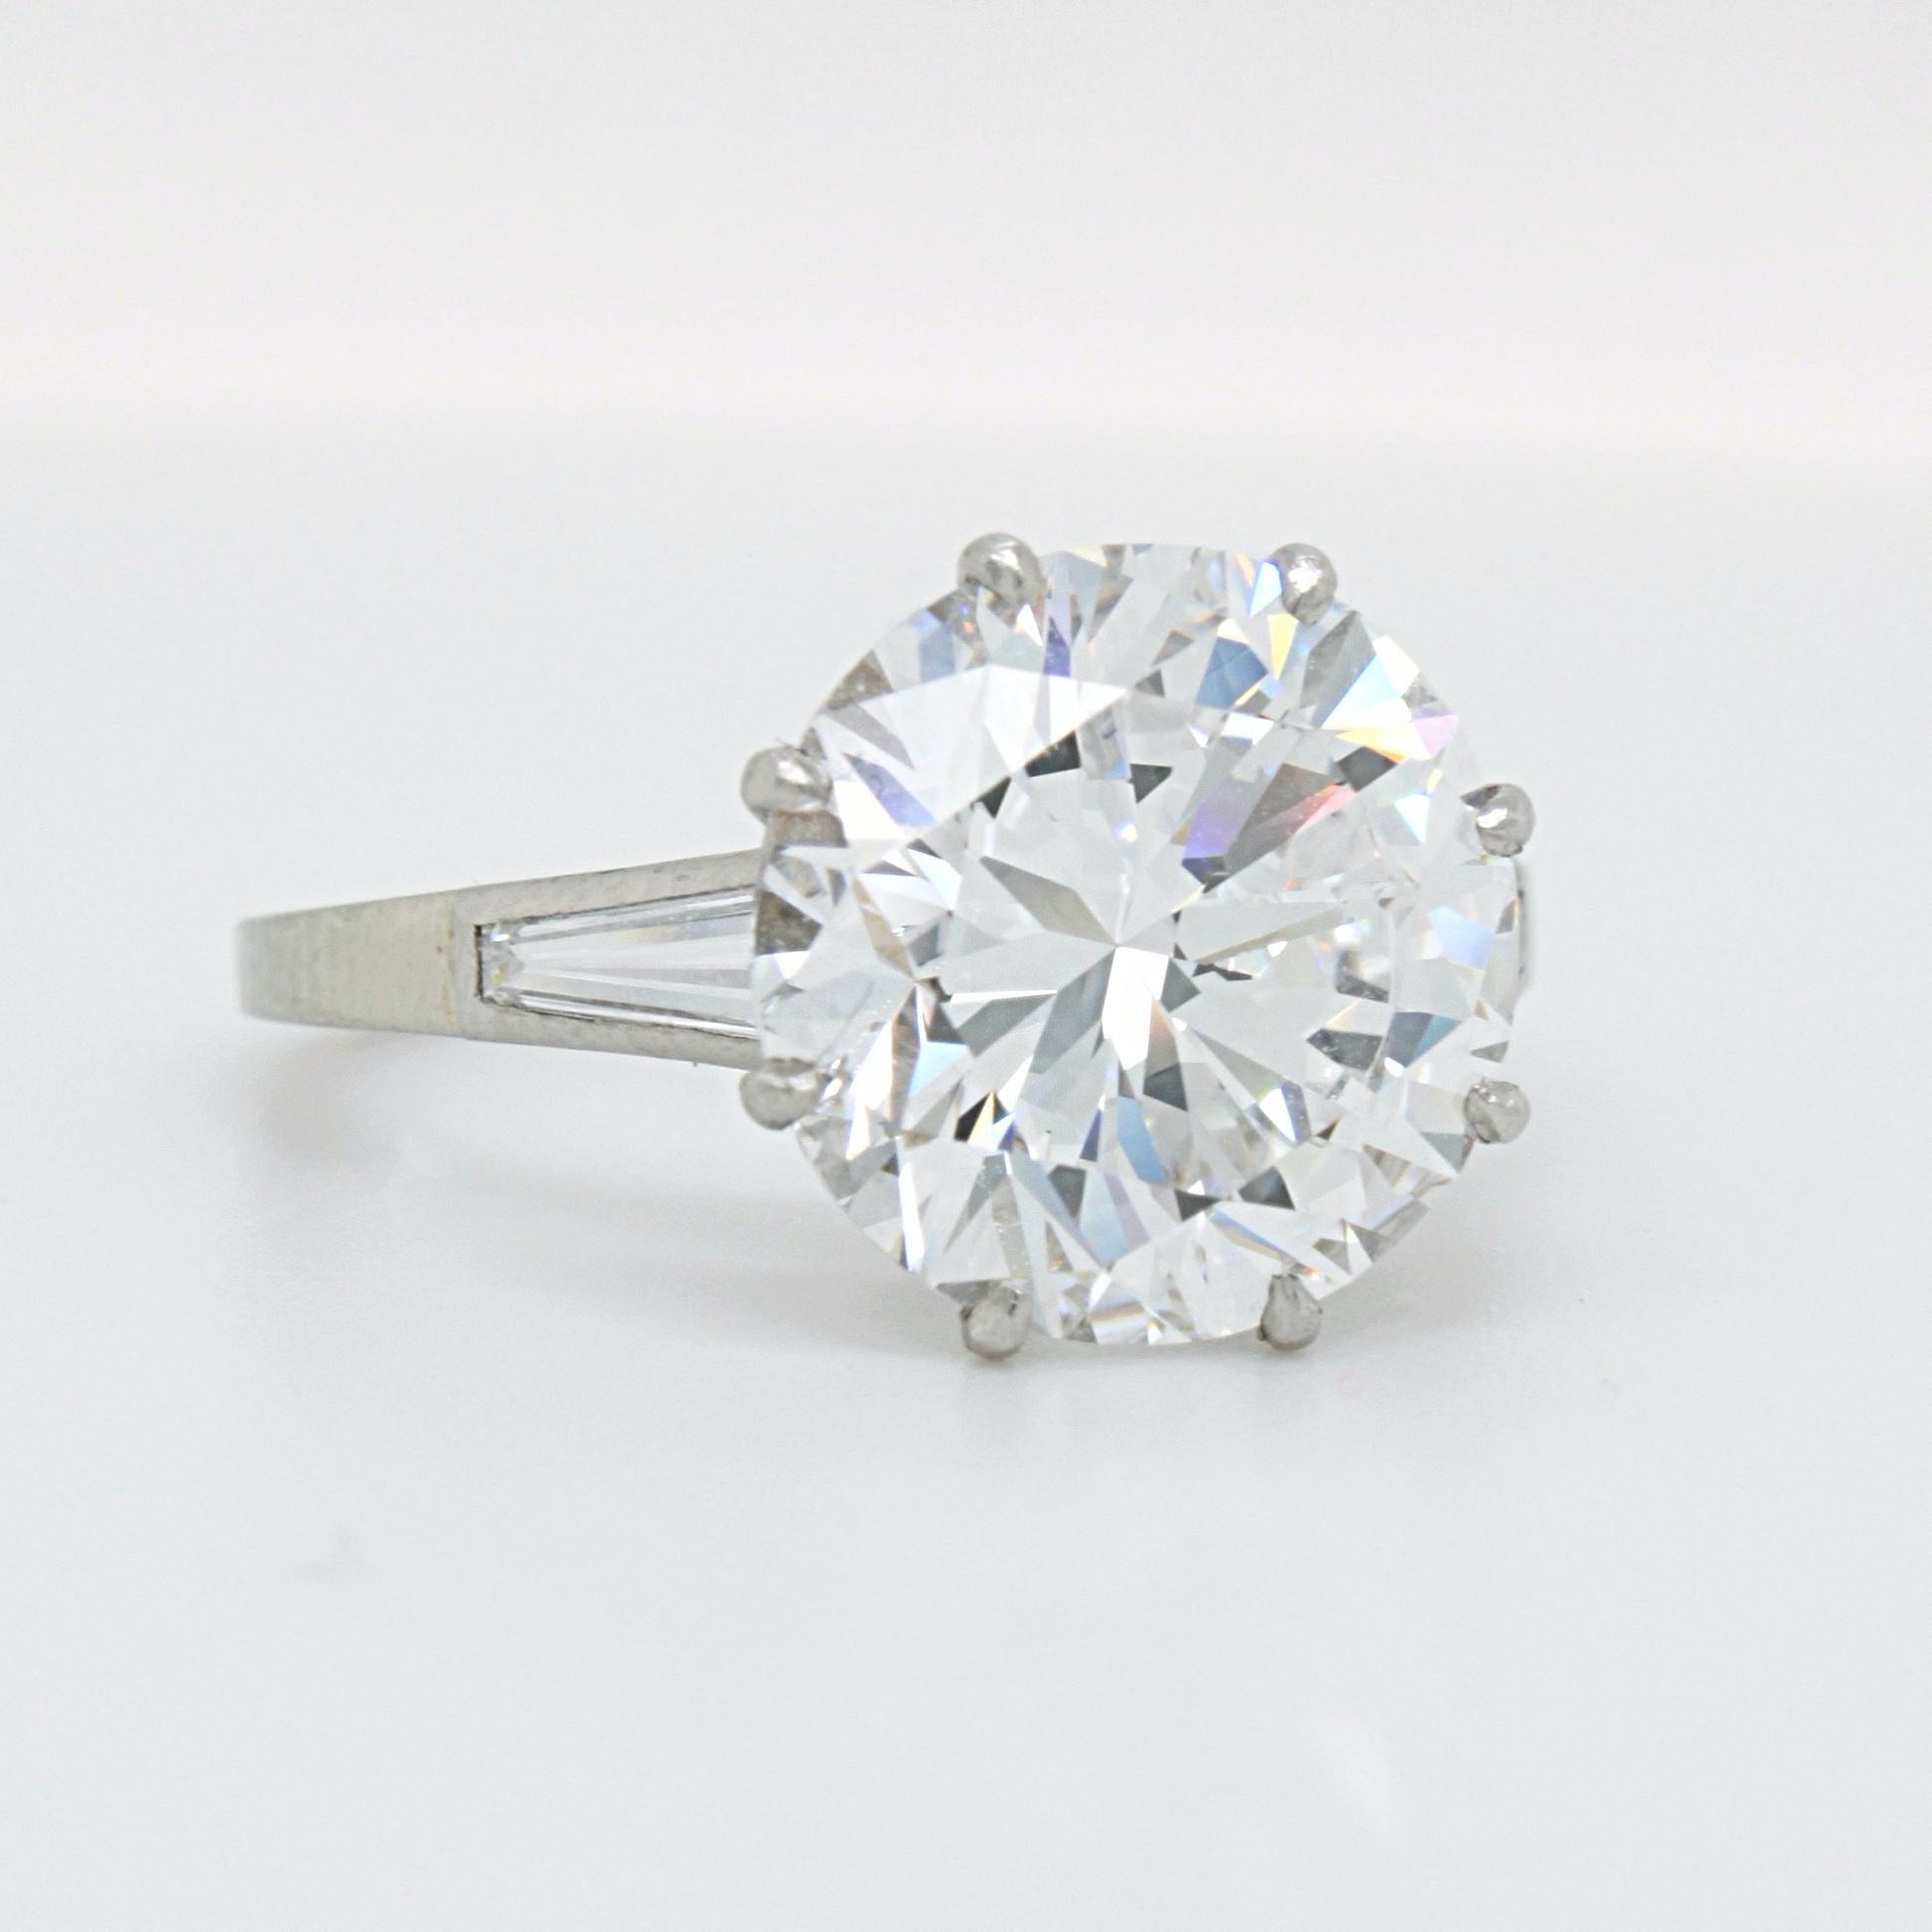 A stunning diamond round brilliant solitaire ring in white gold and platinum. The big centre stone is set in an alluring way showcasing its icy white colour from every angle - a treat of purity for the eyes. 

The centre diamond weighs 5.02 carats,